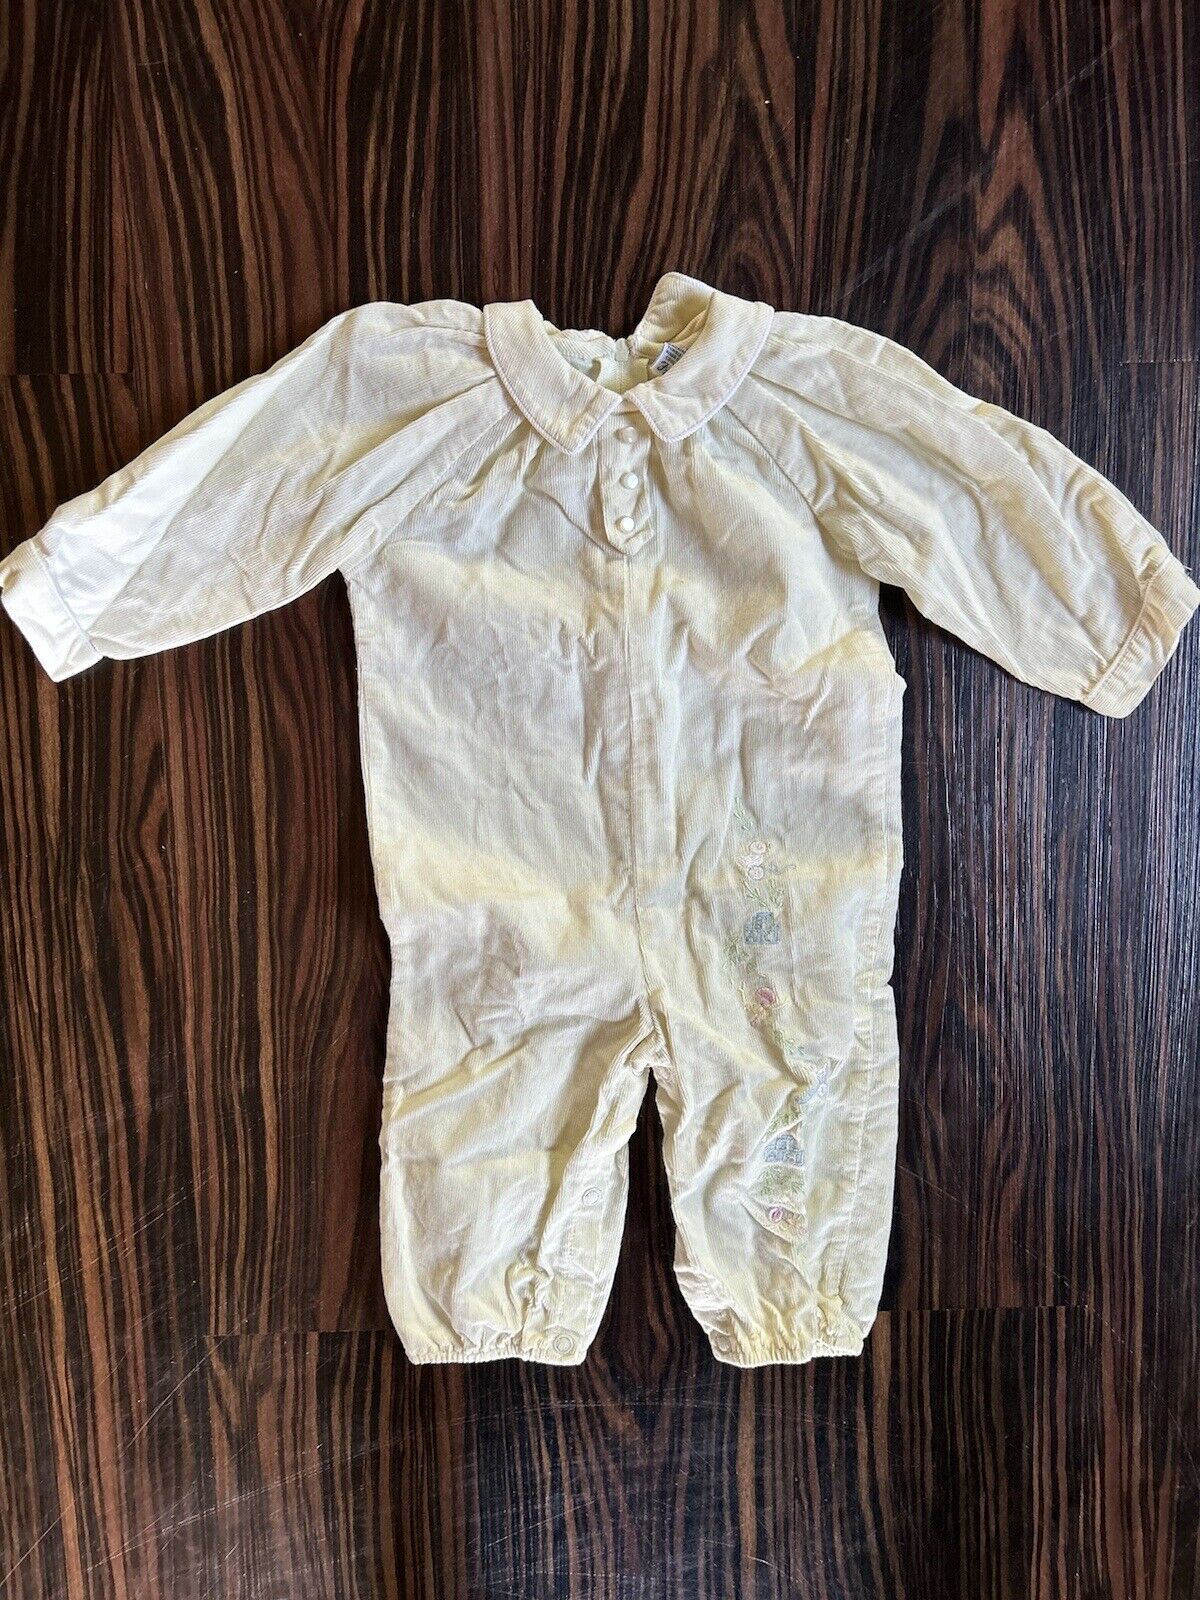 Vintage Friemanit Baby Boys or Girls One Piece Outfit Size 6 Months Infants CUTE